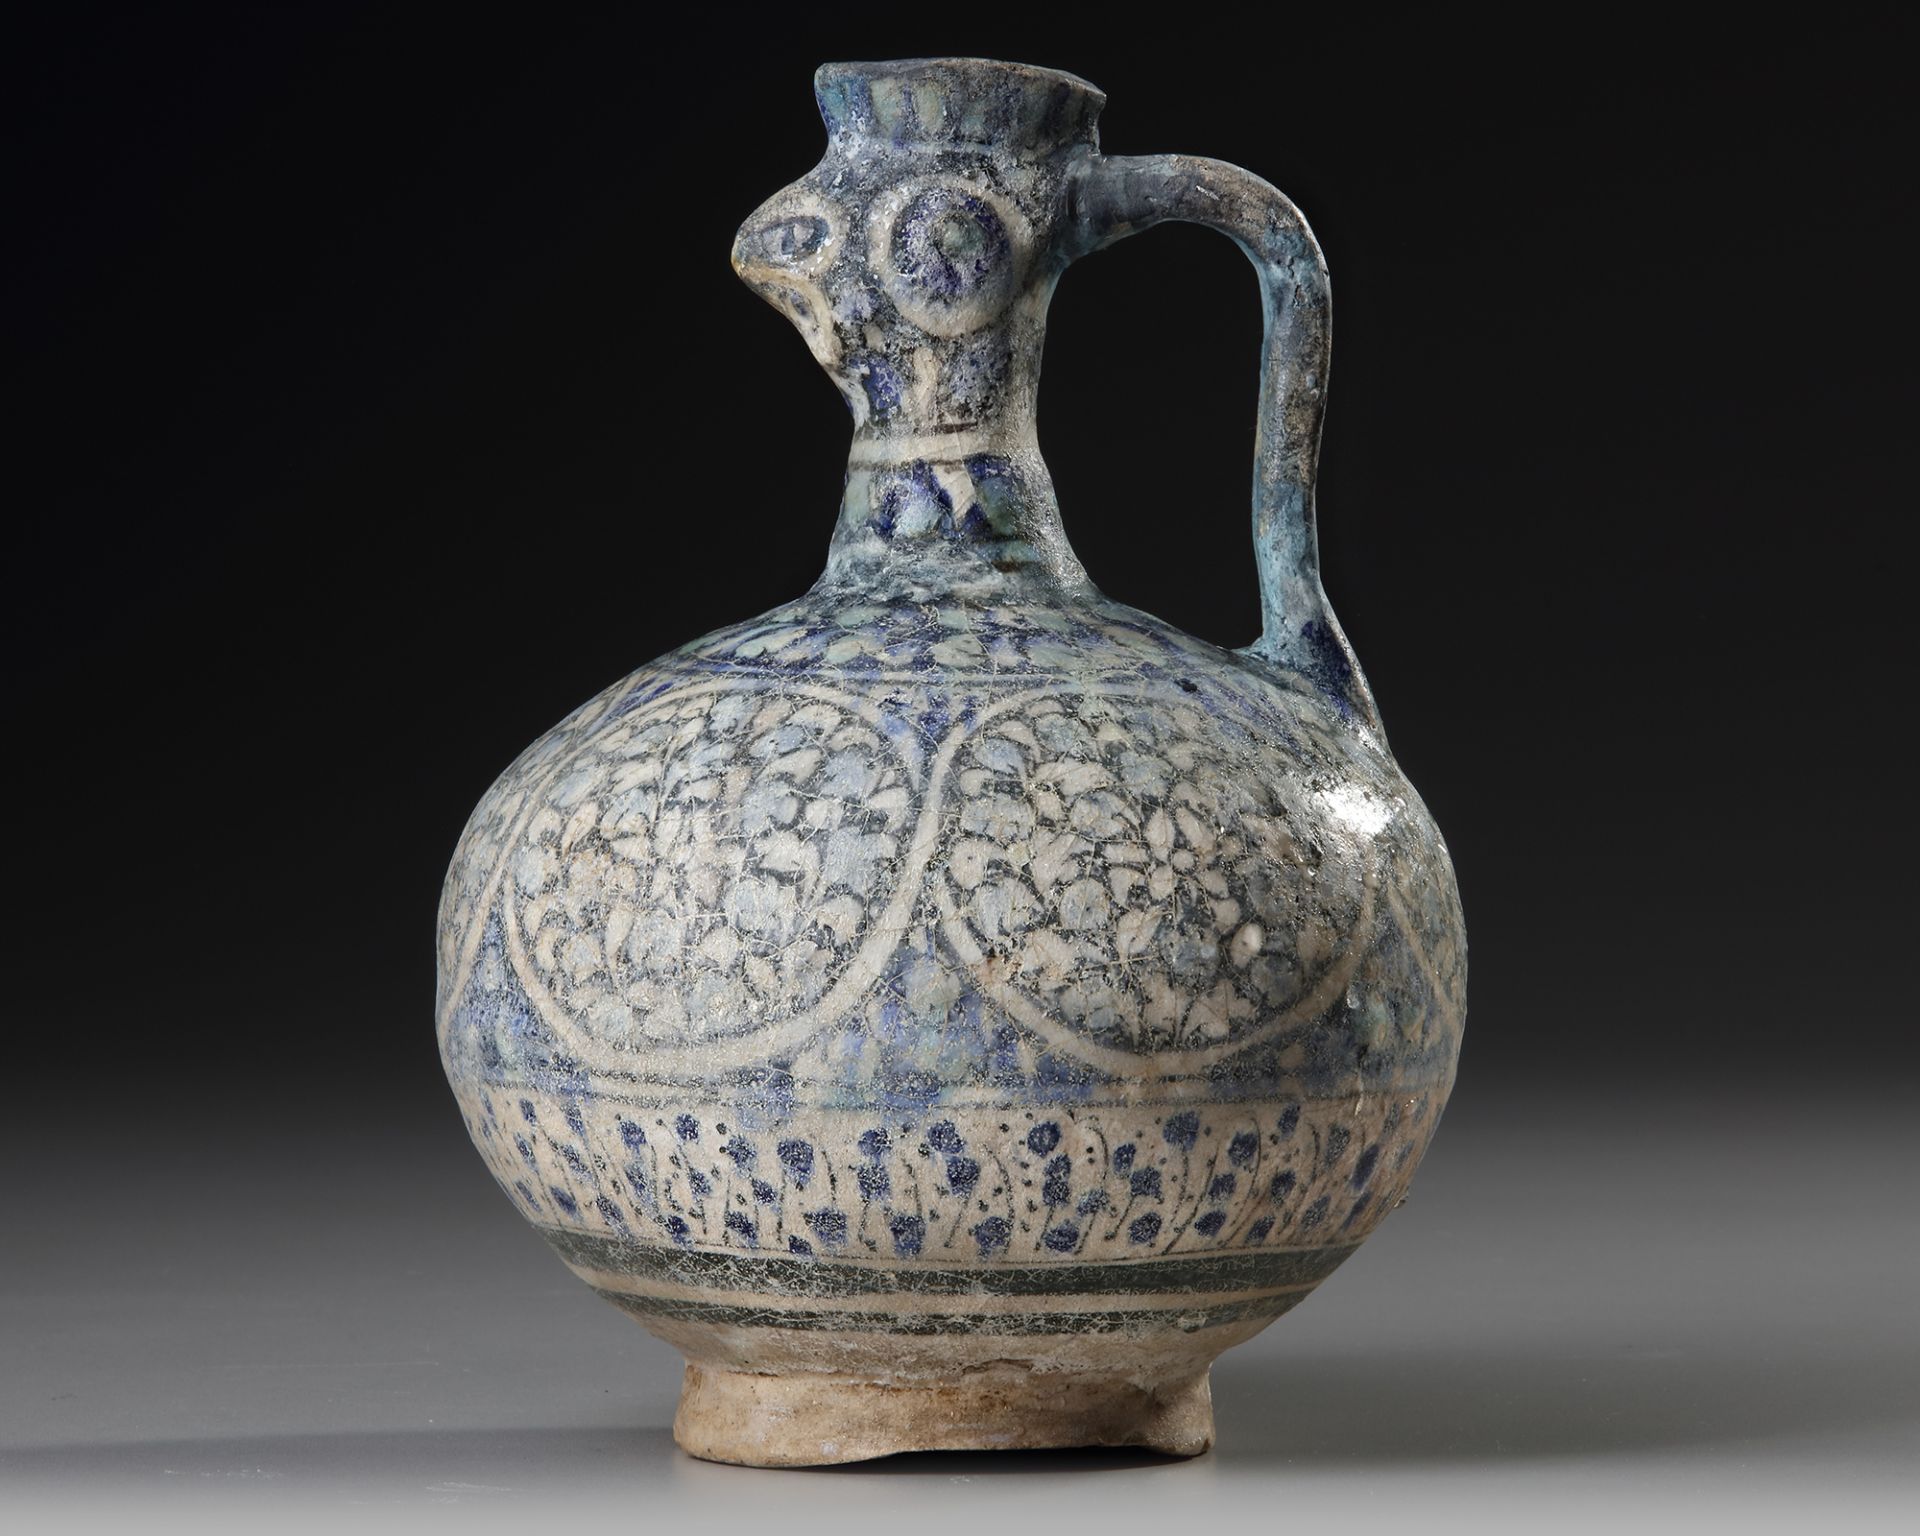 A SULTANABAD POTTERY COCKEREL-HEAD POTTERY EWER, PERSIA, 12TH CENTURY